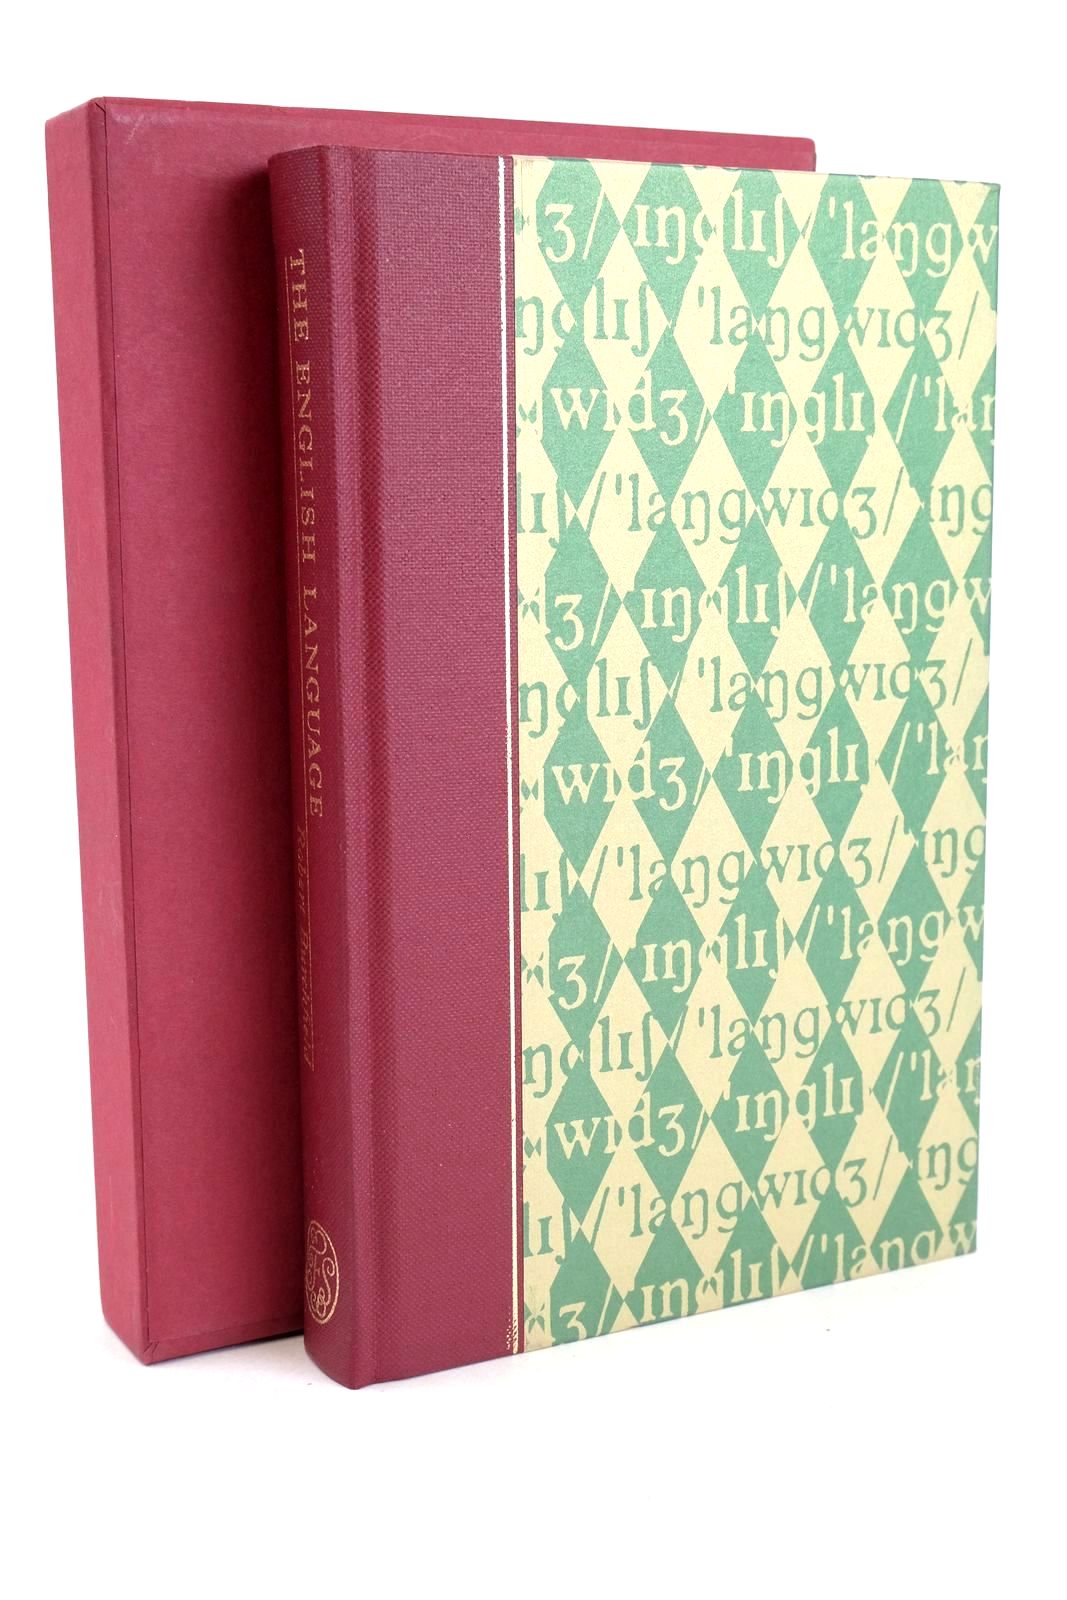 Photo of THE ENGLISH LANGUAGE written by Burchfield, Robert McCrum, Robert Simpson, John published by Folio Society (STOCK CODE: 1326006)  for sale by Stella & Rose's Books